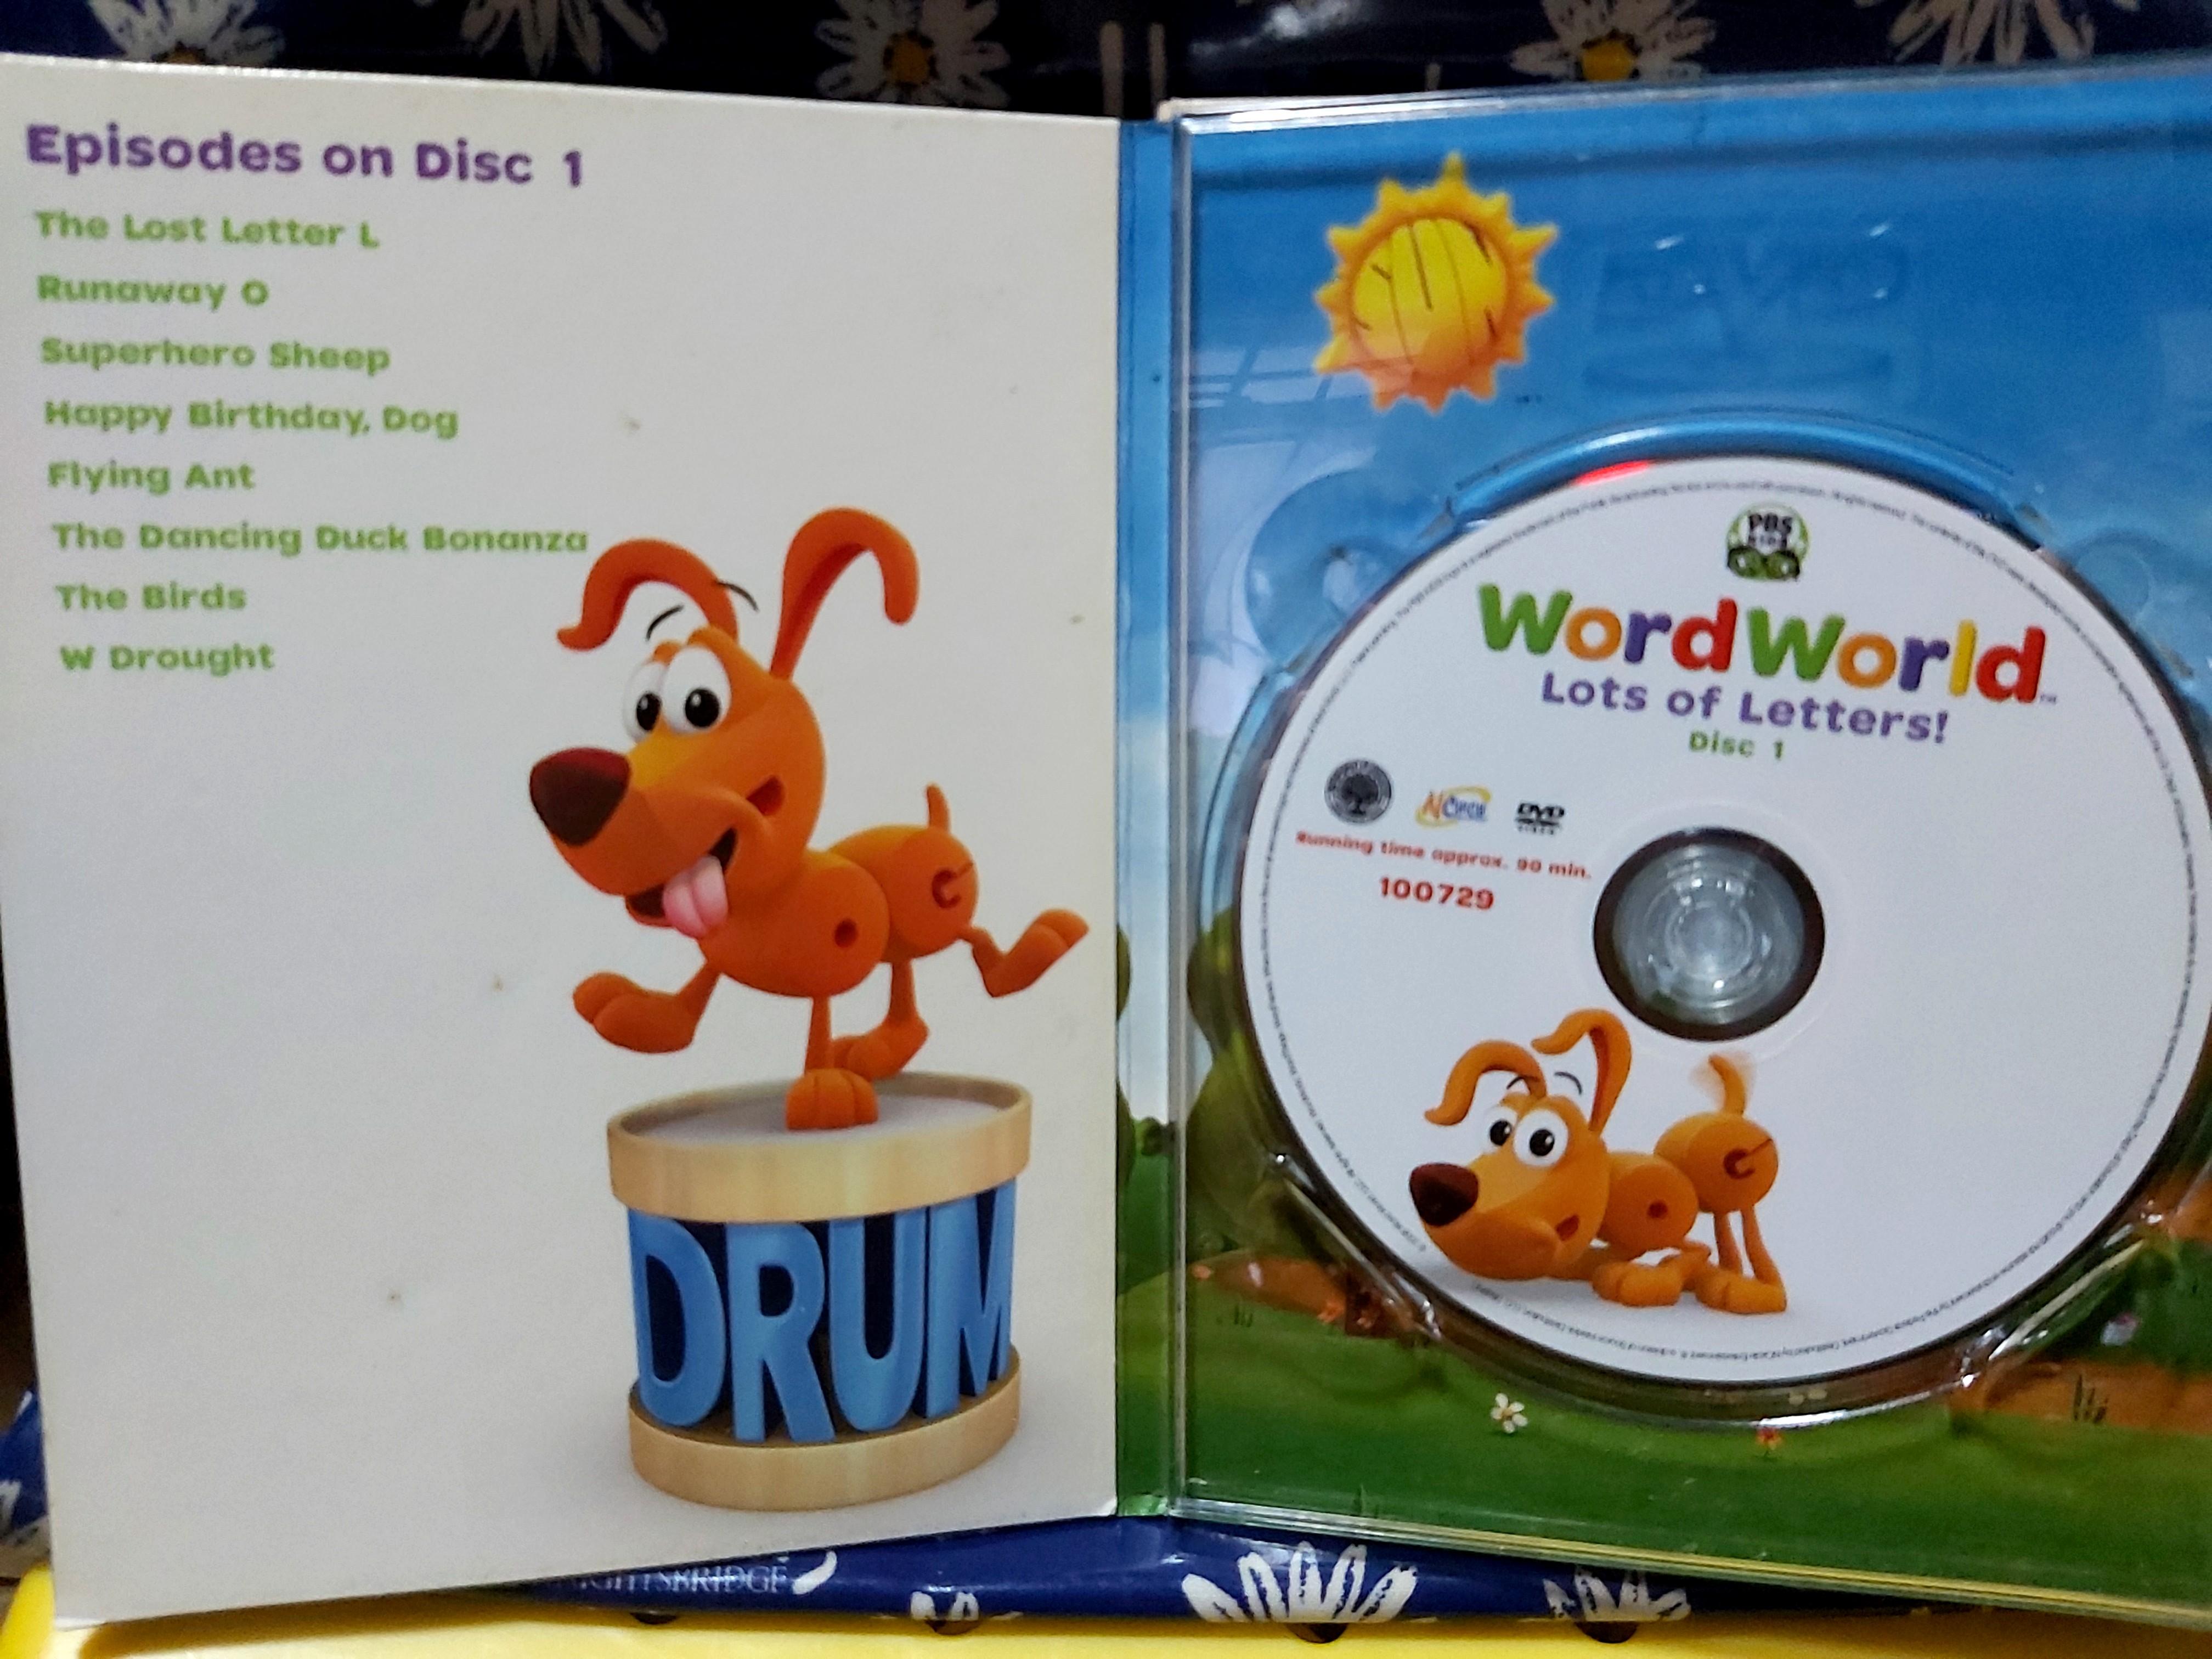 WORD WORLD Box Set Collection - Lots of Letters! Dvds